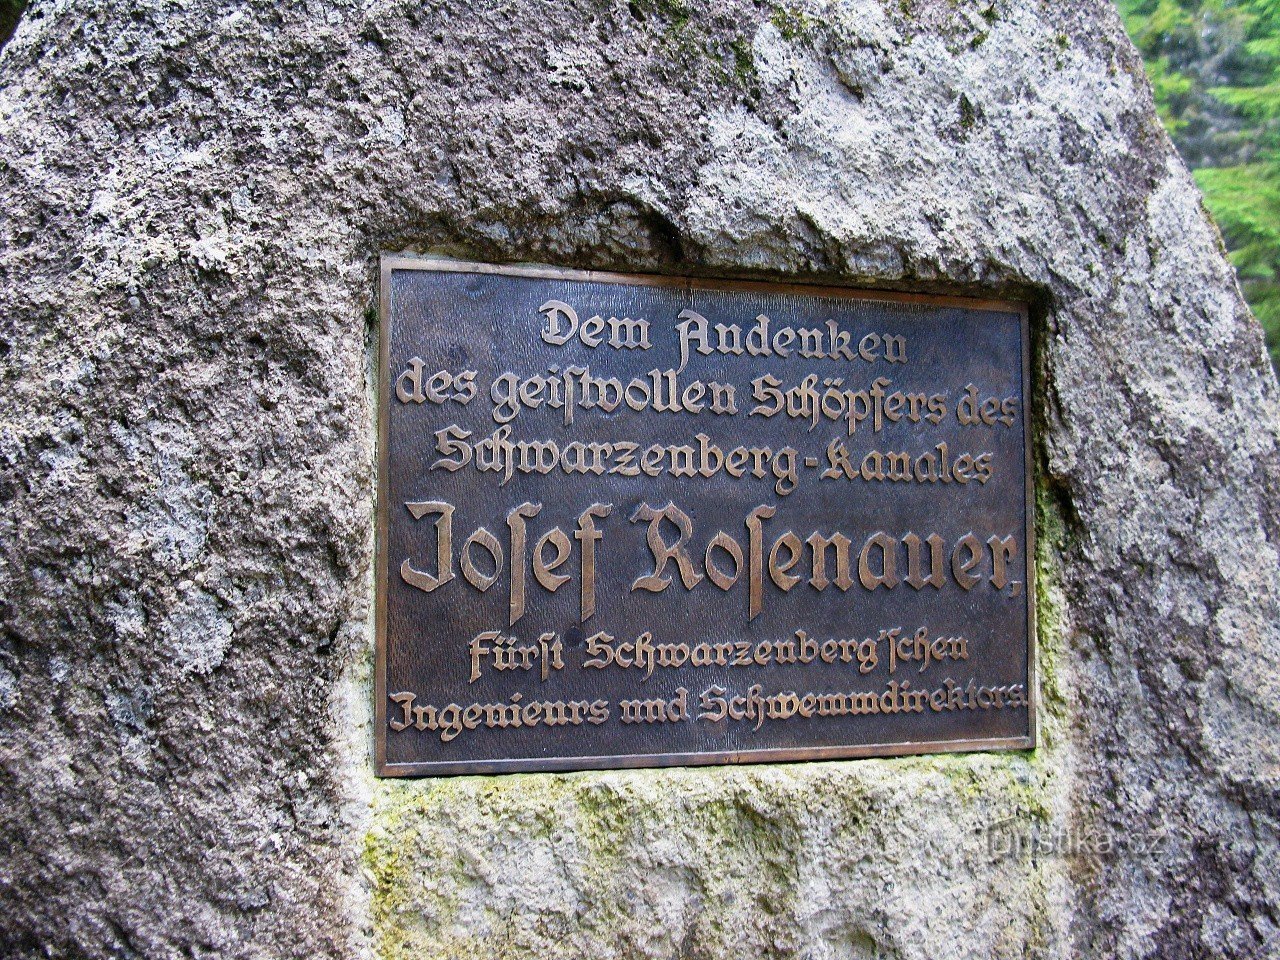 The inscription on the monument is in German